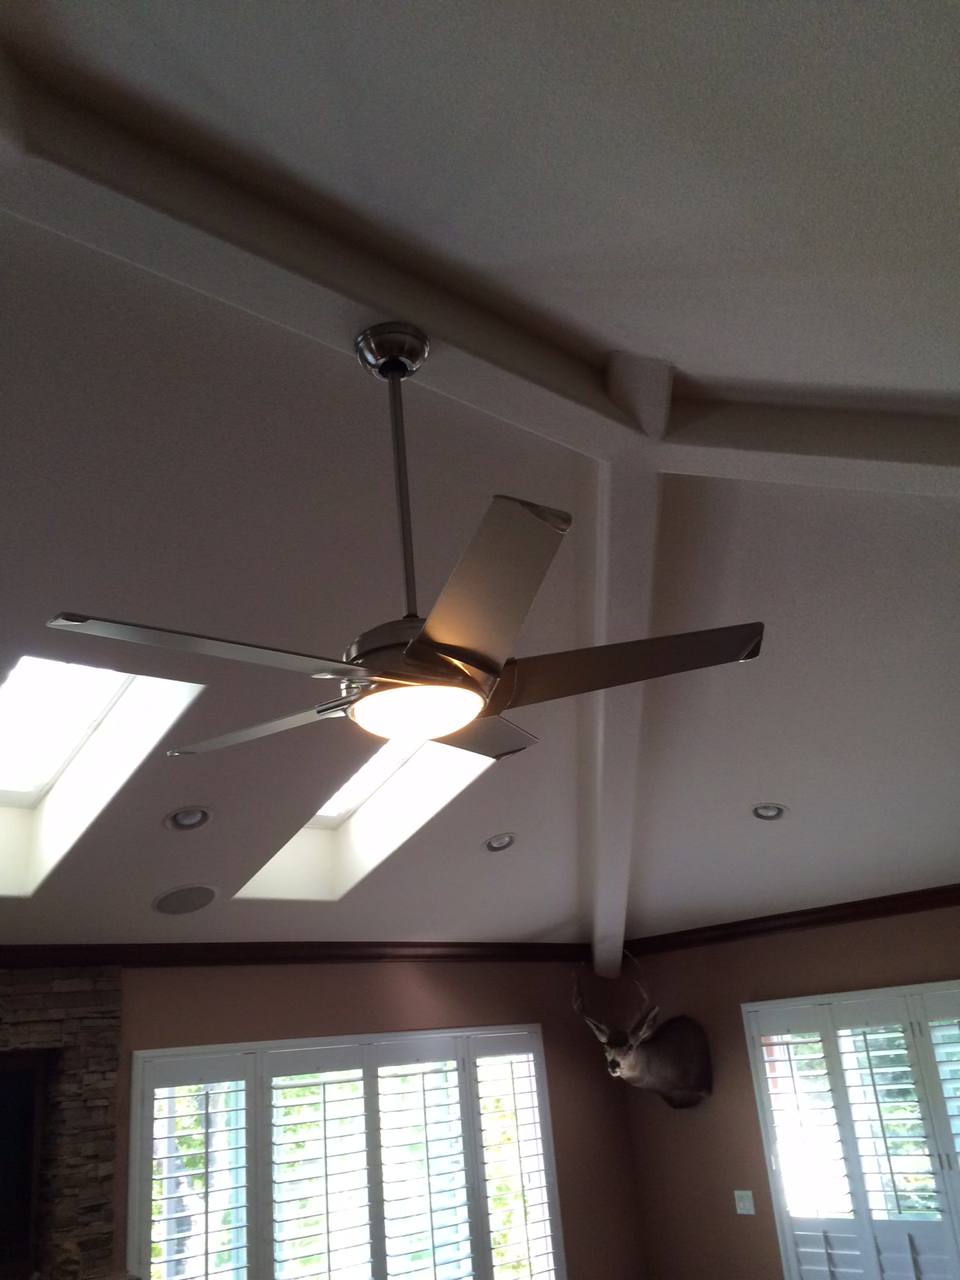 Get an estimate of how much a black ceiling fan would cost for free.